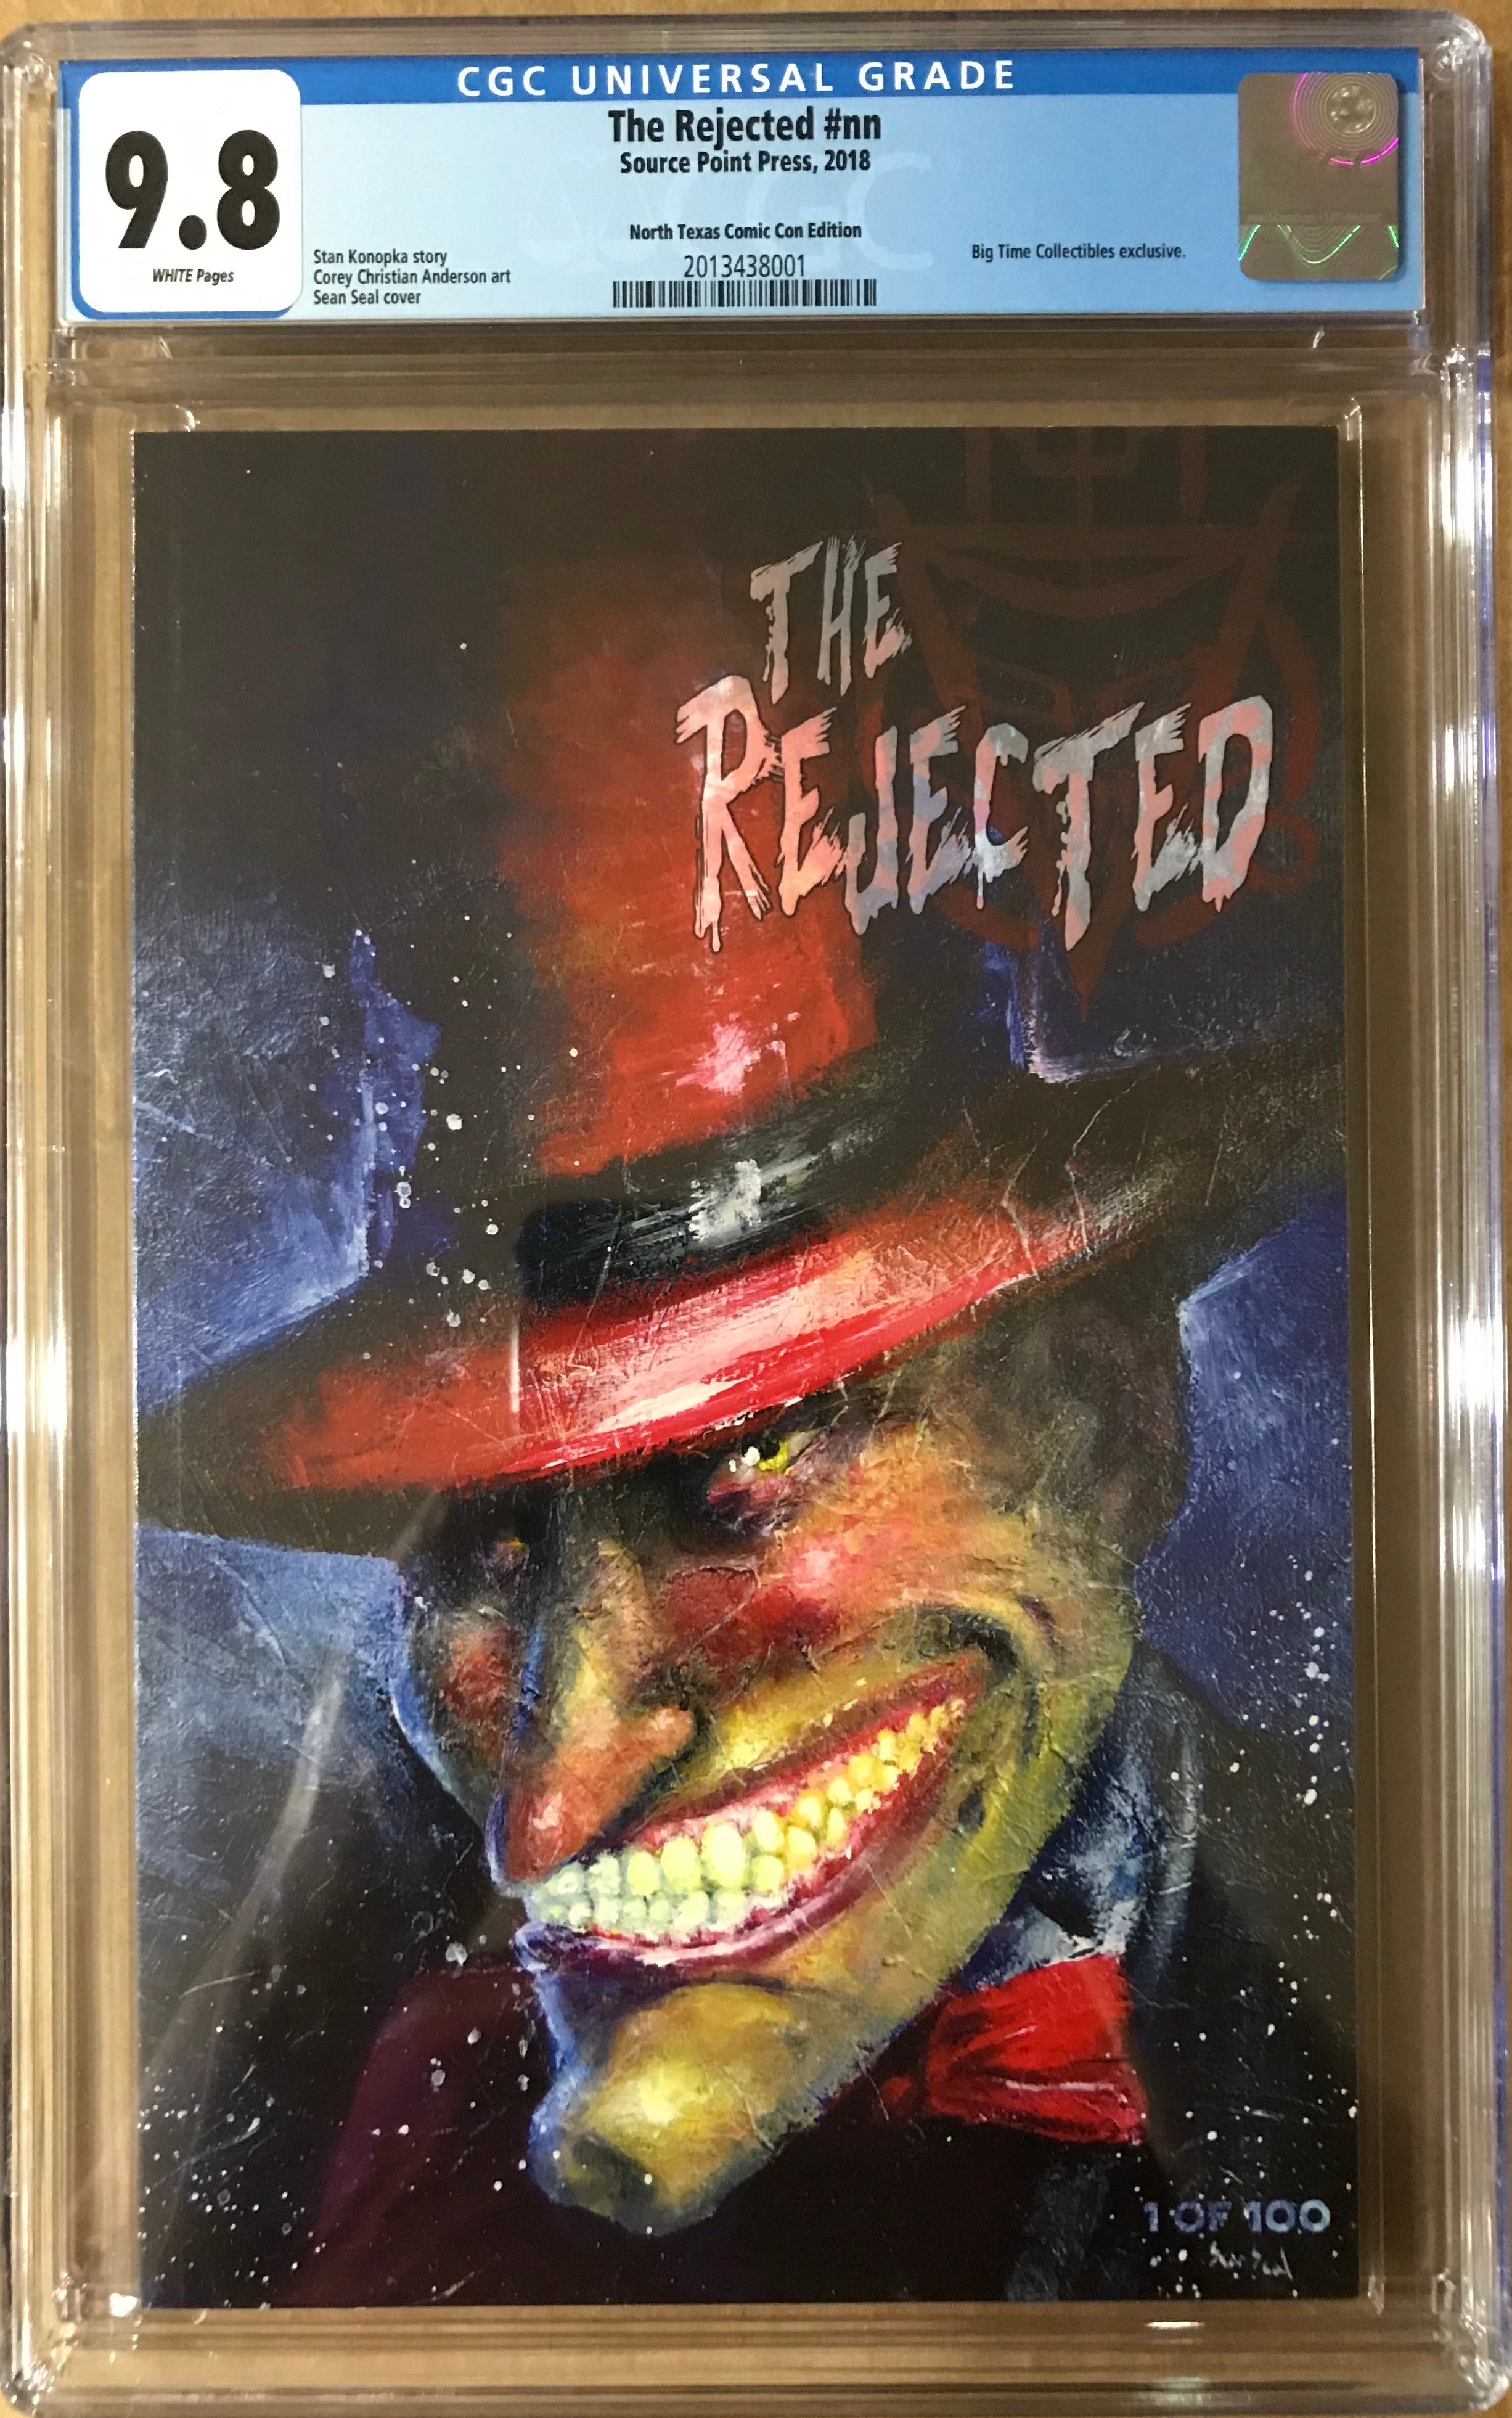 REJECTED #1 BTC & NTC COMIC BOOK SHOW 2019 EXCLUSIVE CGC 9.8